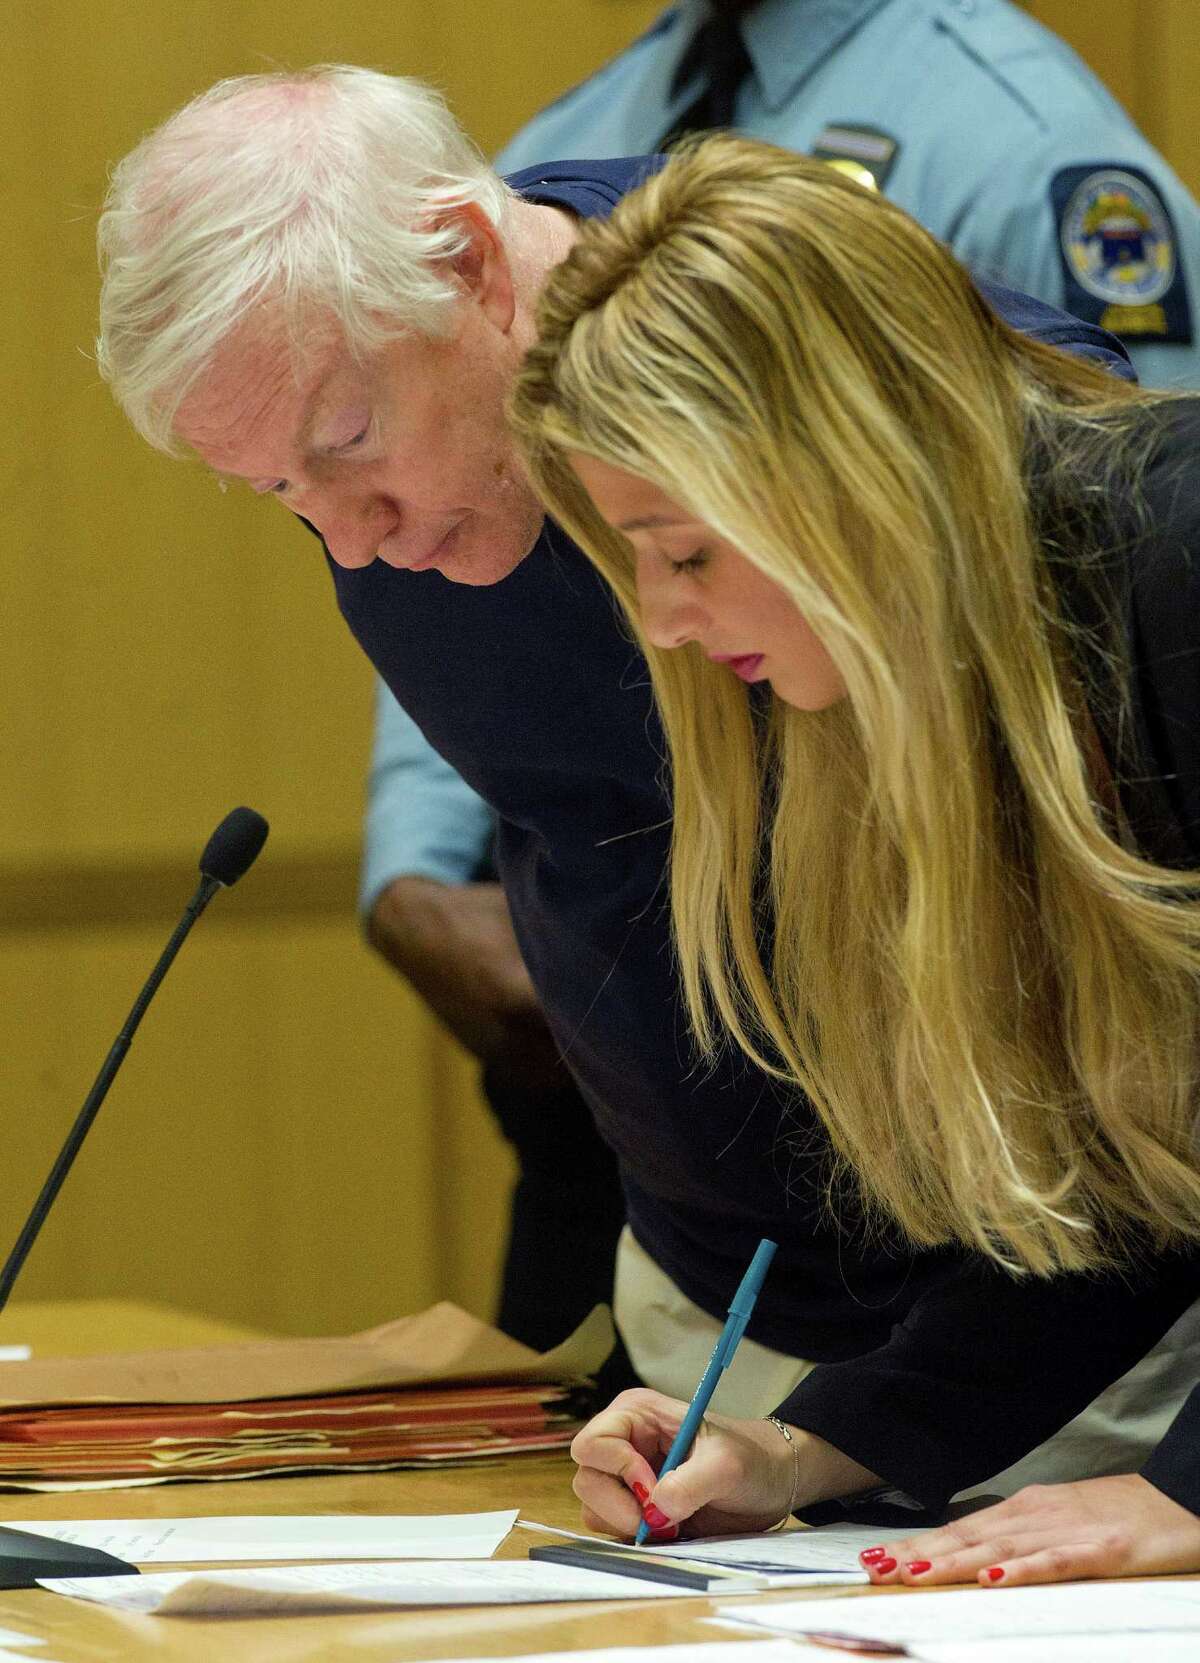 Michael Luecke stands with Antigone Curis, legal intern assisting the public defender, as he is arraigned at State Superior Court in Stamford, Conn., on Thursday, February 27, on charges stemming from Luecke allegedly masturbating in a hallway at Westhill High School where he was a substitute teacher.